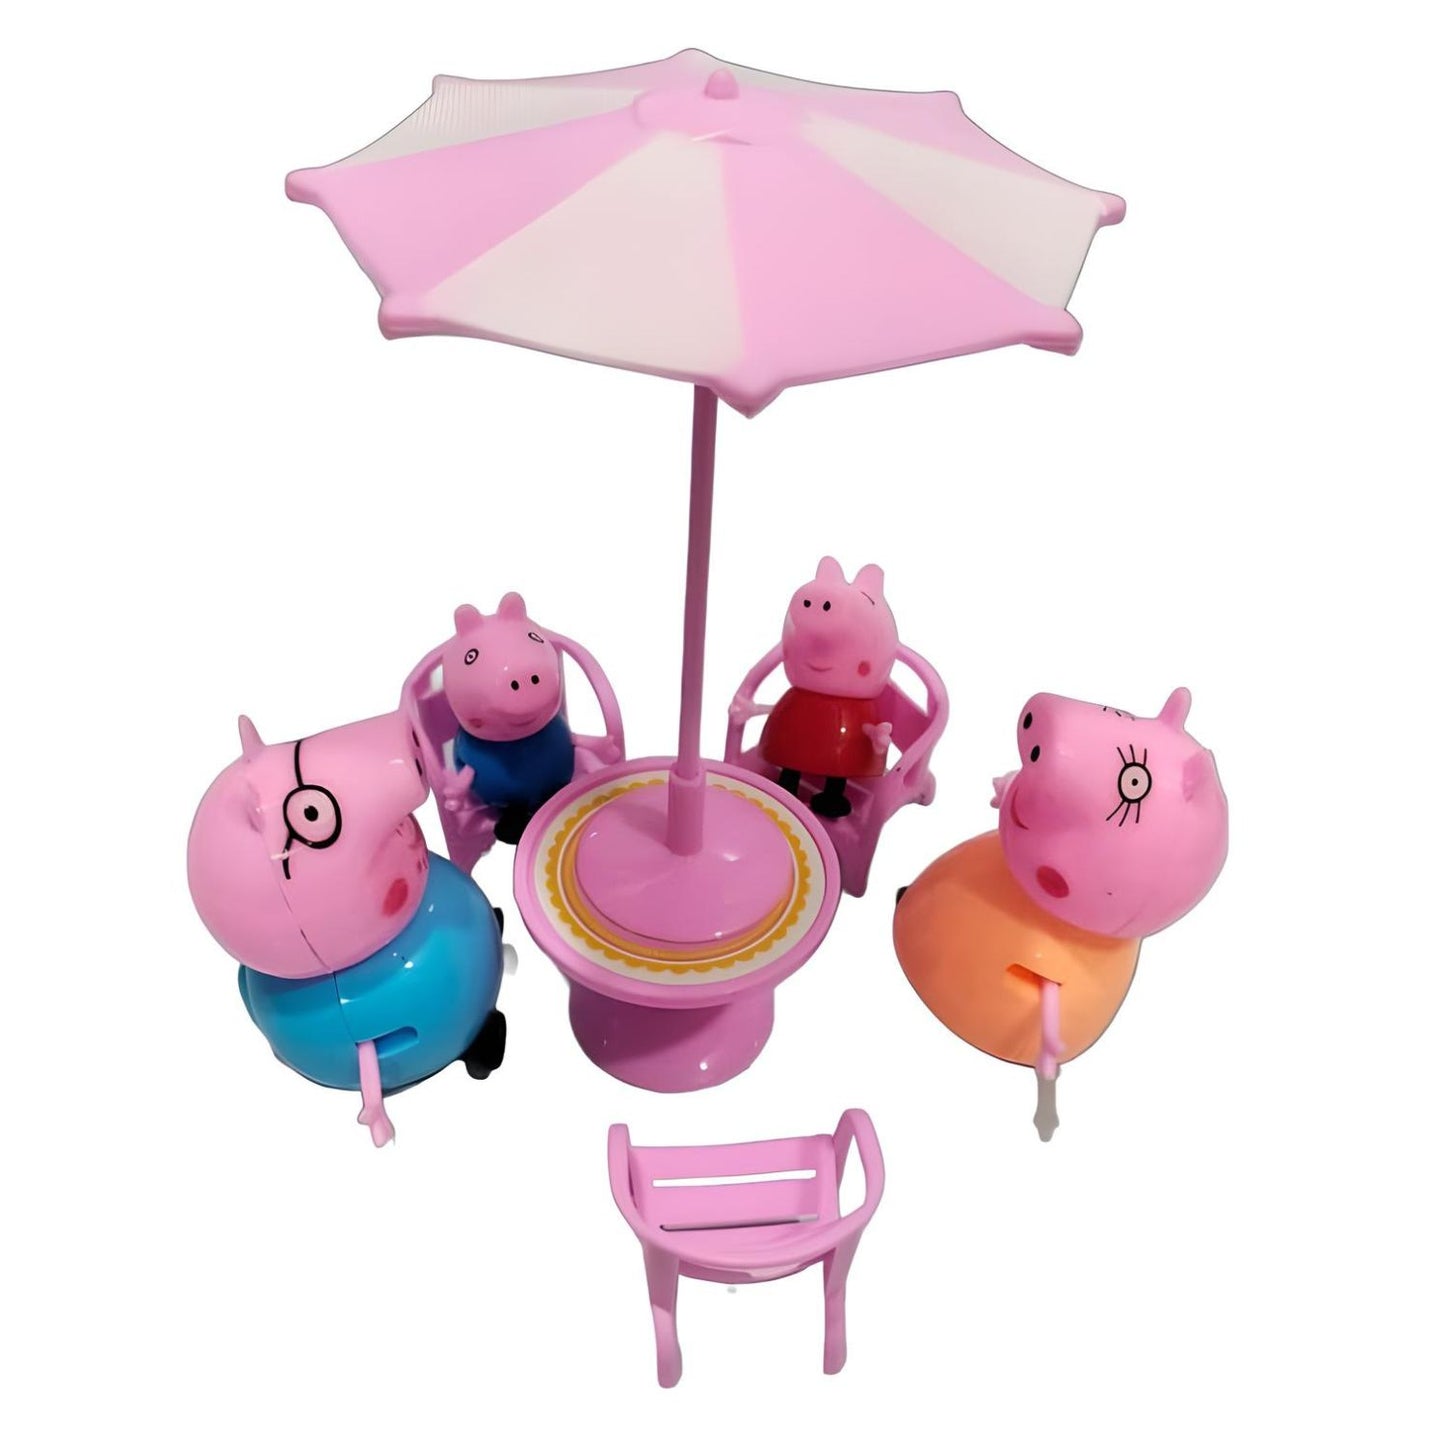 Peppa Pig Family House Toy Set - 5 Pcs, Educational Play for 3+ Kids, Pink Includes 1 Umbrella, 3 Chairs, 1 Table